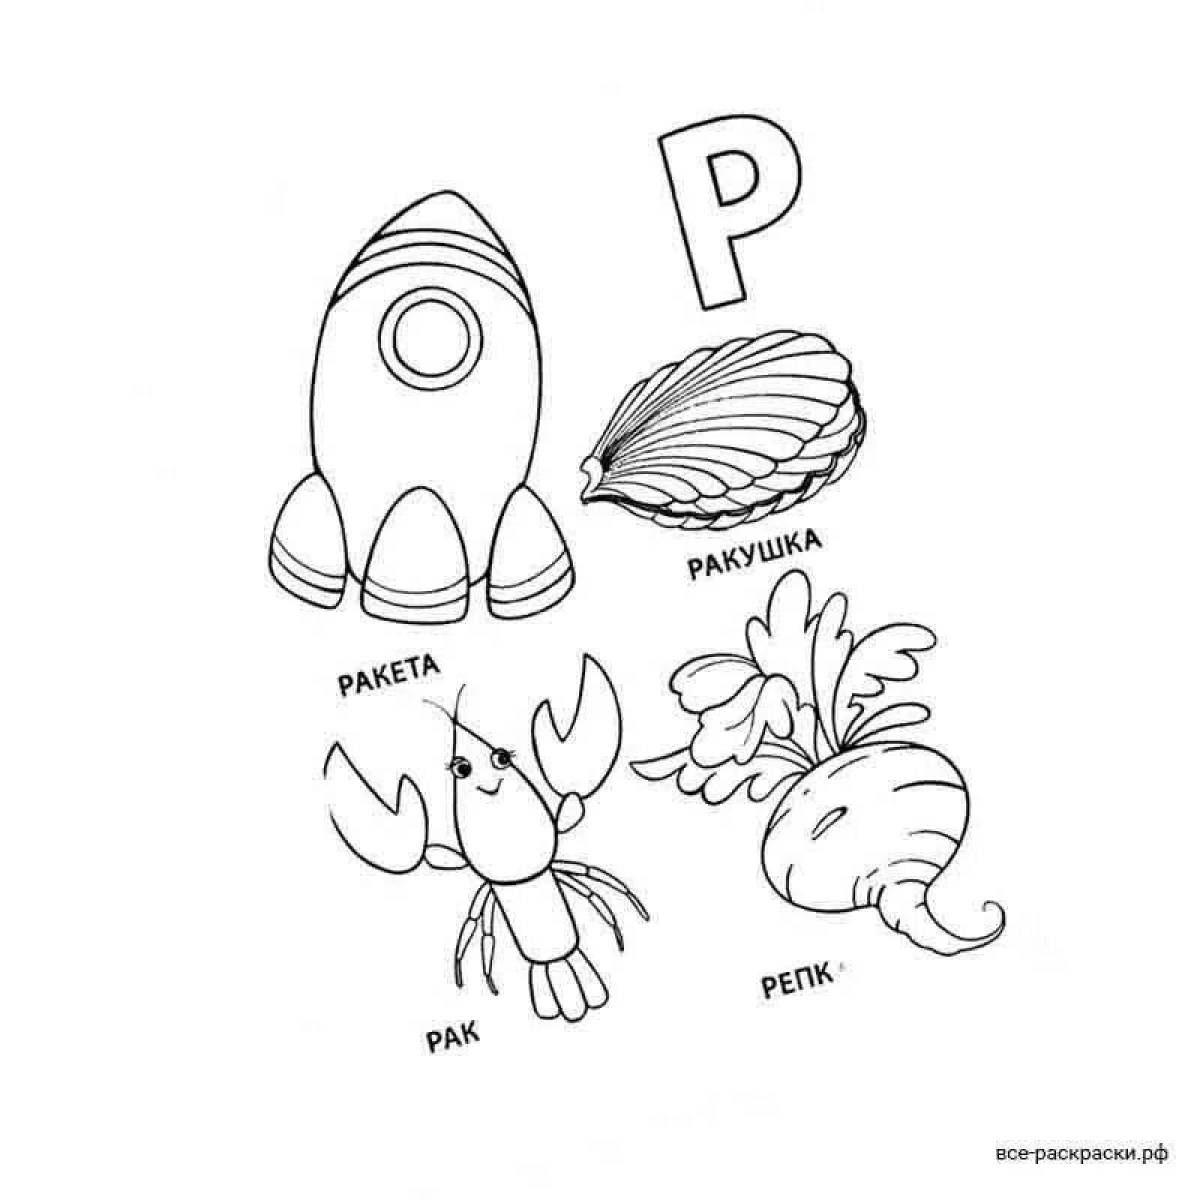 Adorable letter p coloring book for kids